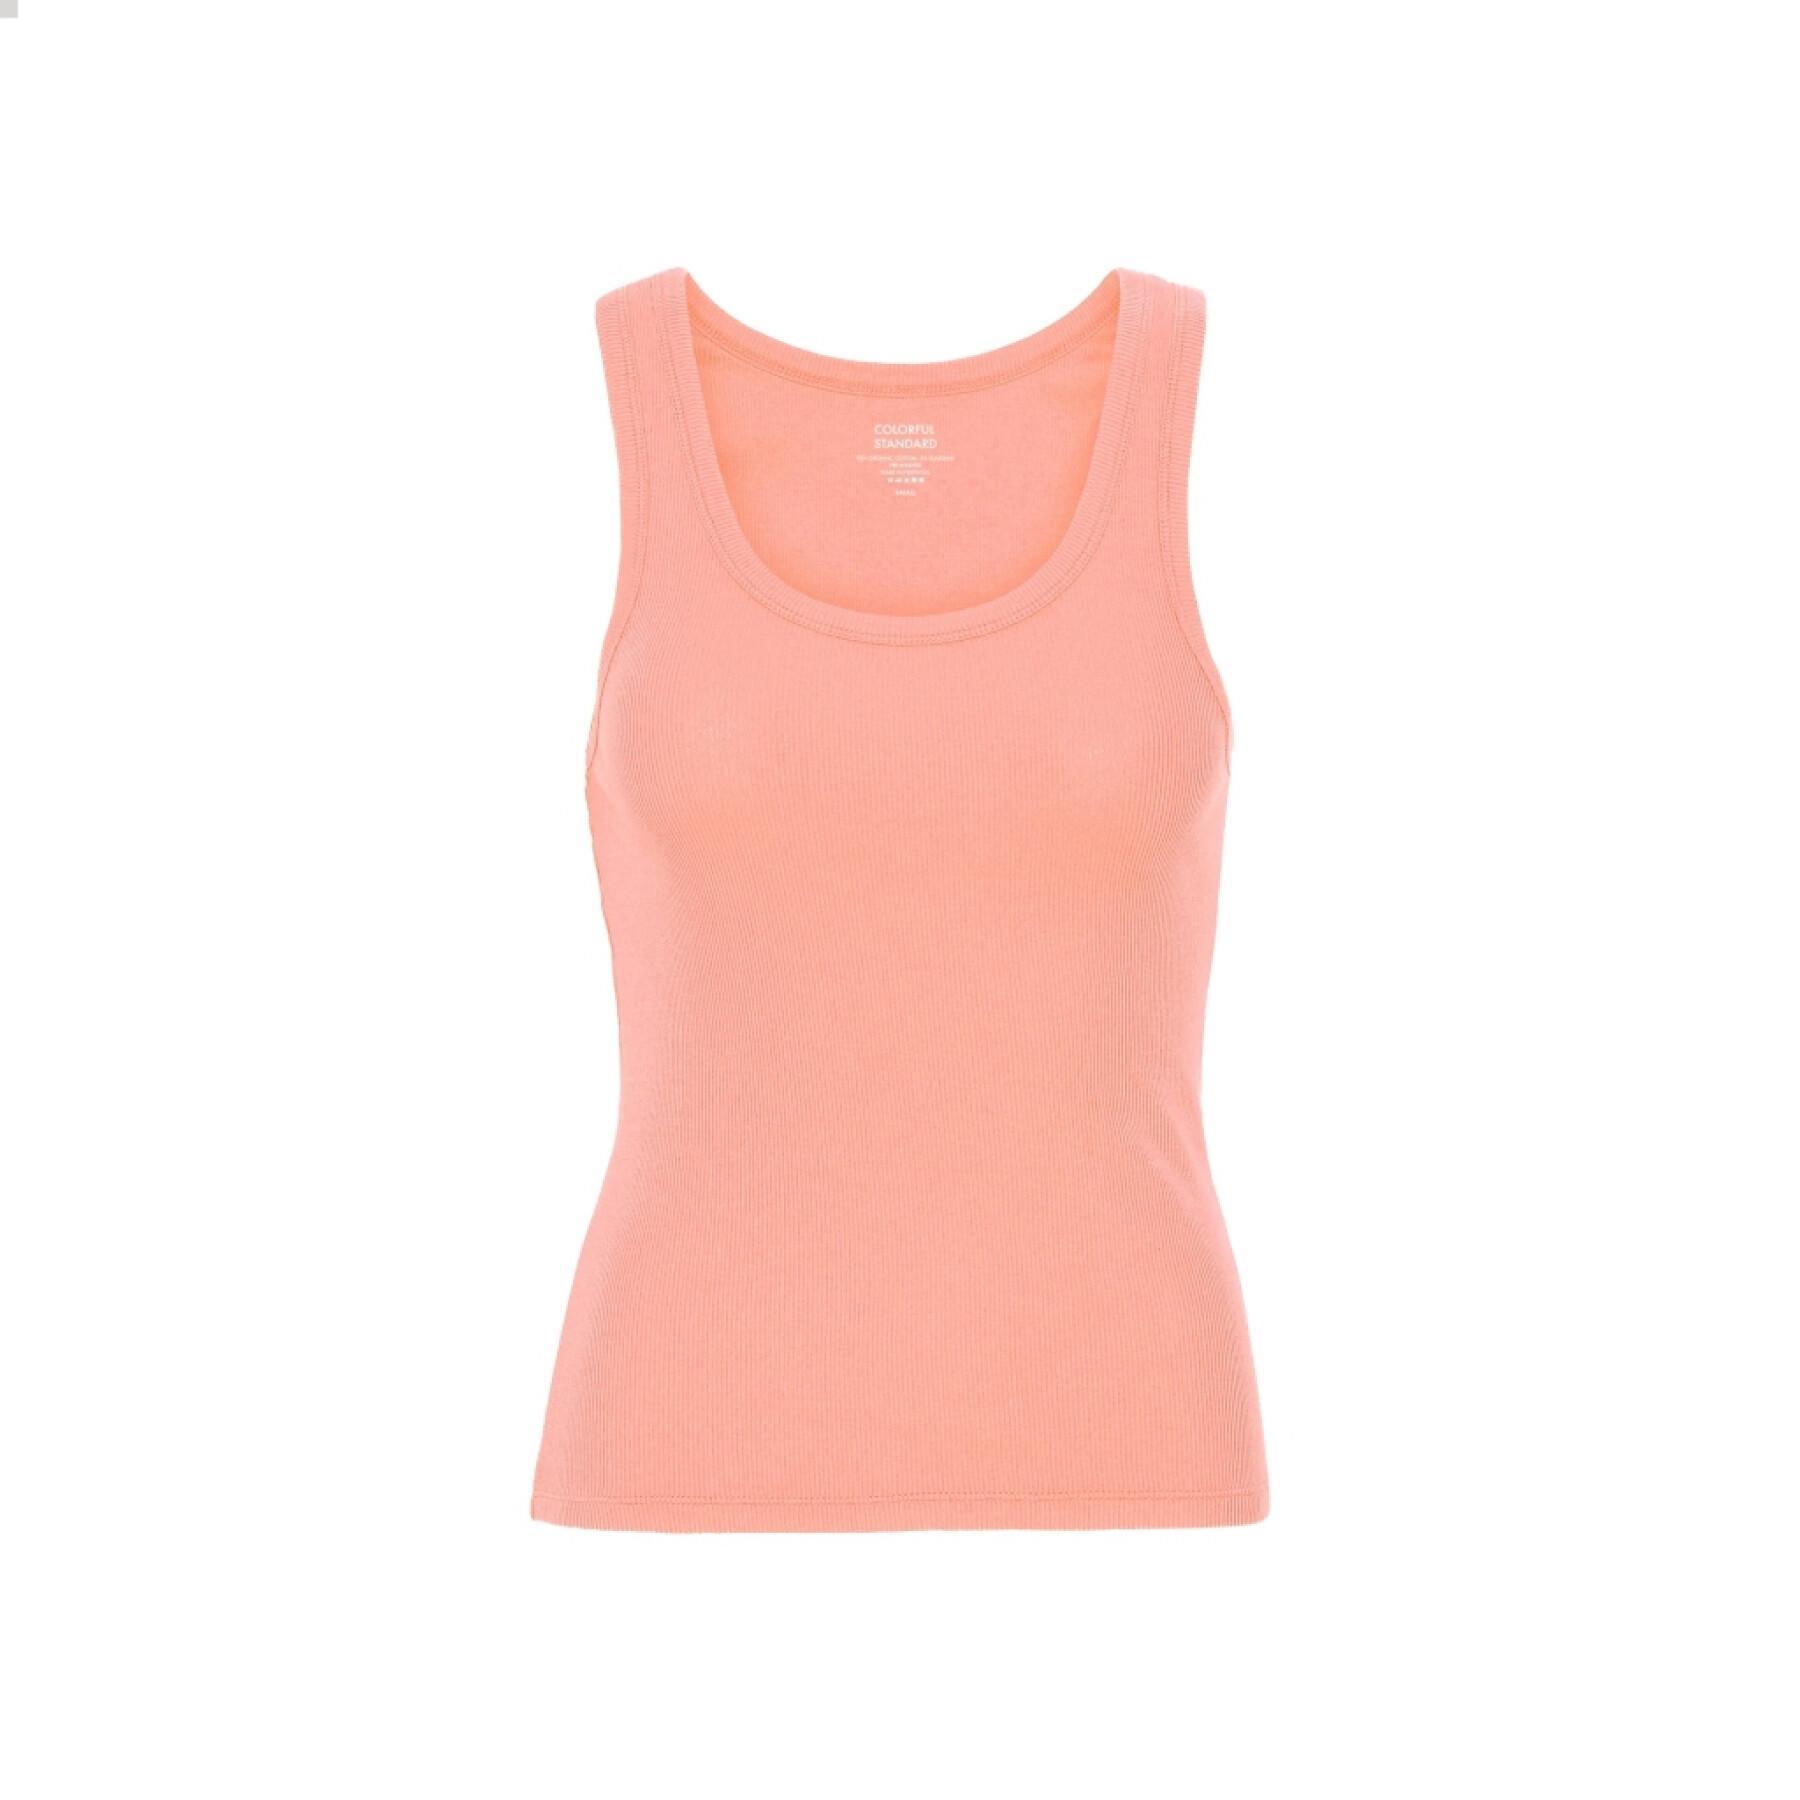 Women's ribbed tank top Colorful Standard Organic bright coral